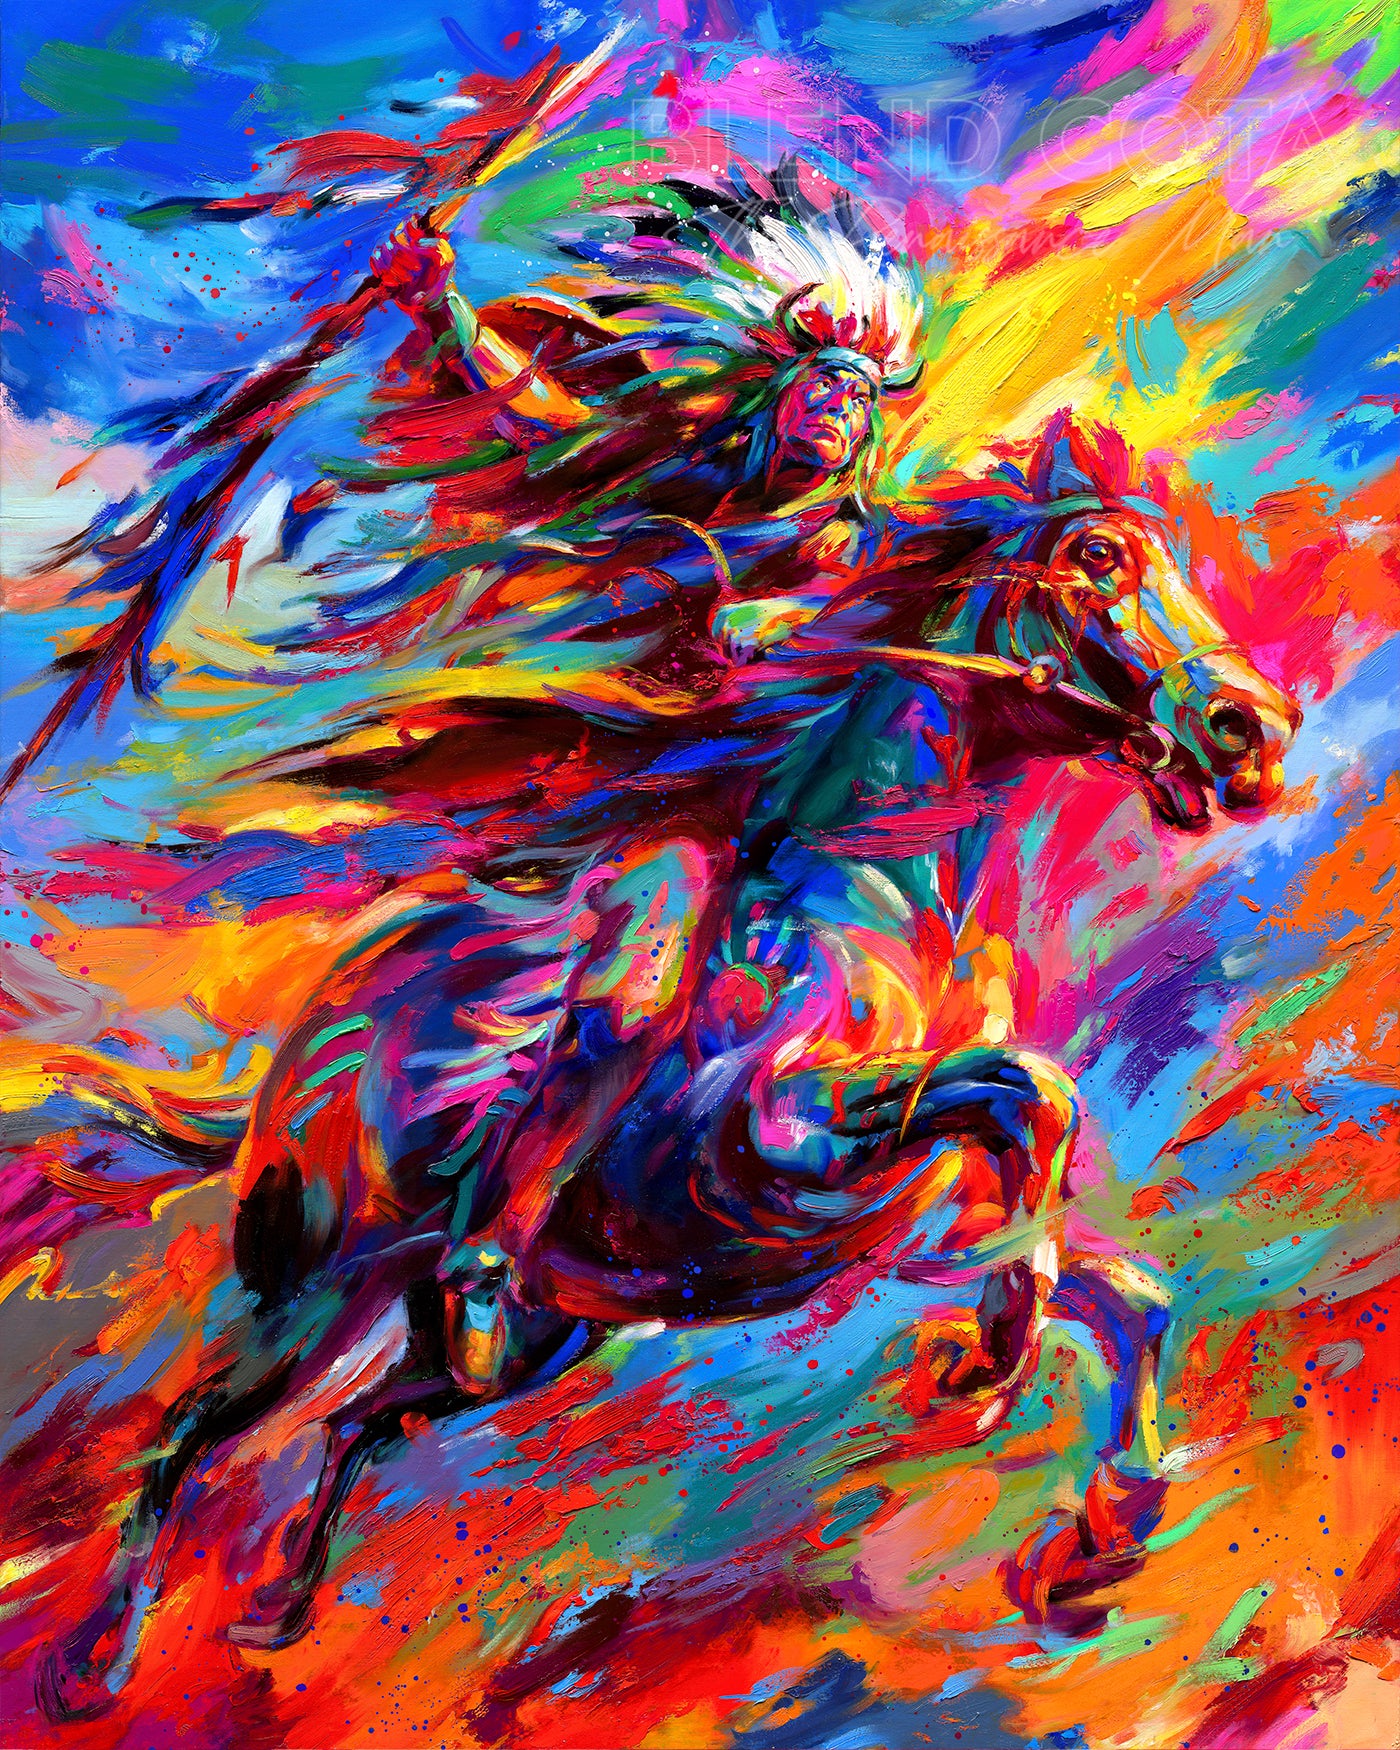 Native american in war bonnet holding a feather decorated spear and riding his horse, symbol of force and oneness between man and animal in colorful brushstrokes, color expressionism style.